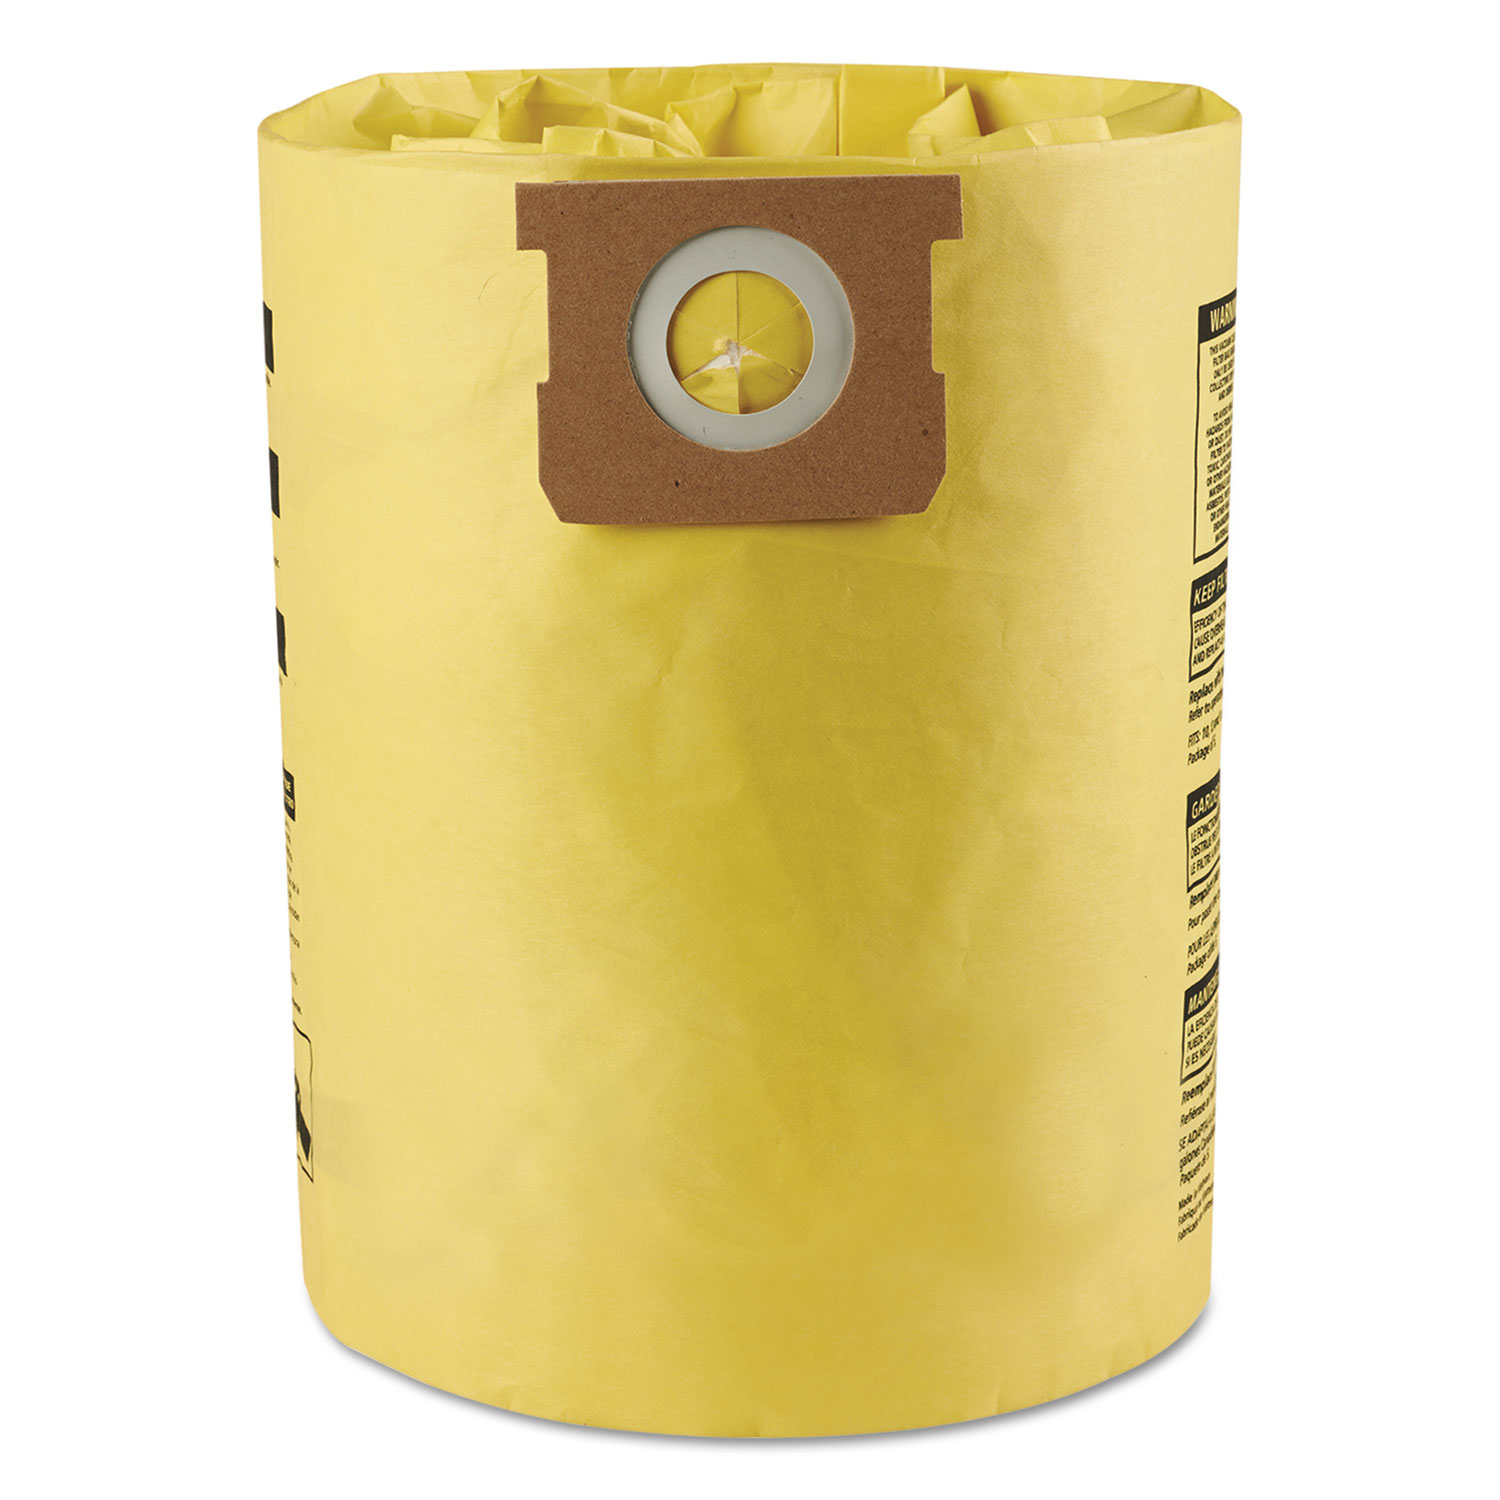  Shop-Vac 9067200 High Efficiency Collection Filter Bags, 10 14gal, 2/Pack (SHO9067200) 